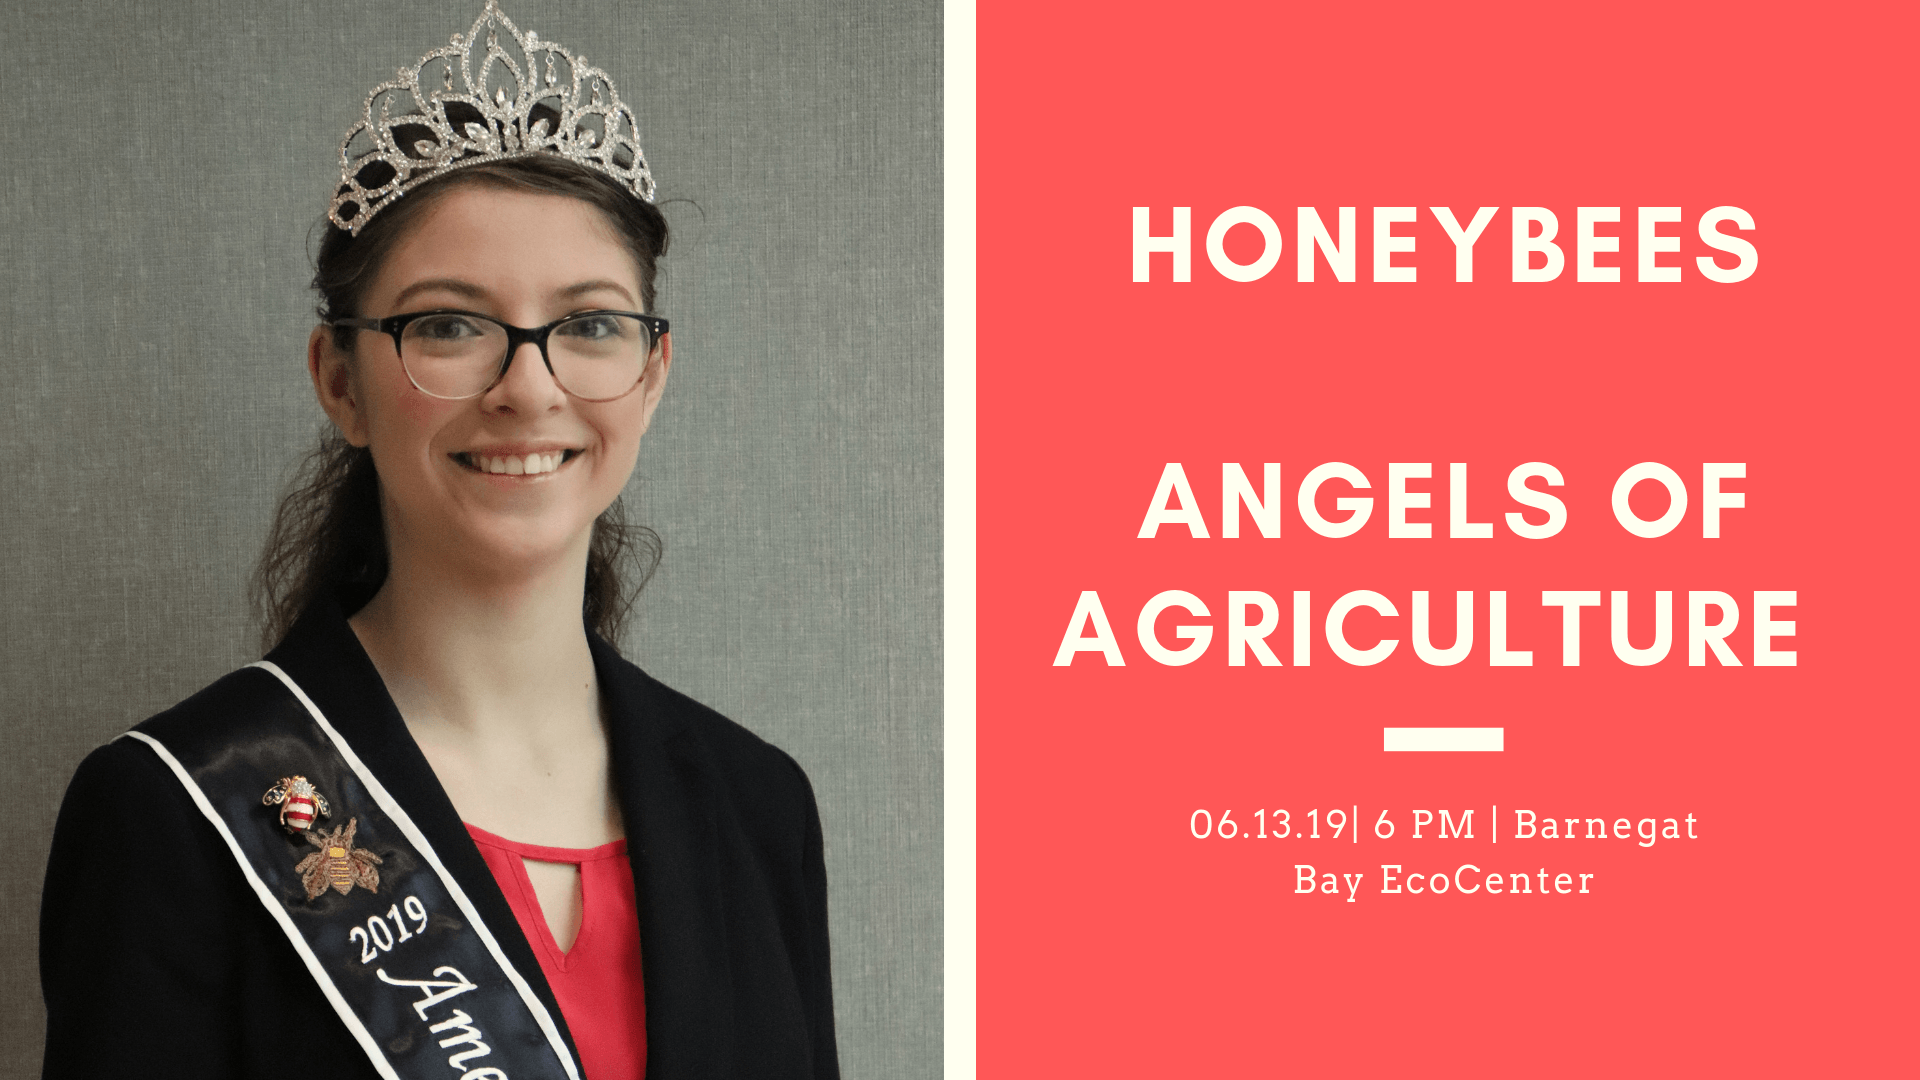 Angels of Agriculture with the American Honey Bee Princess